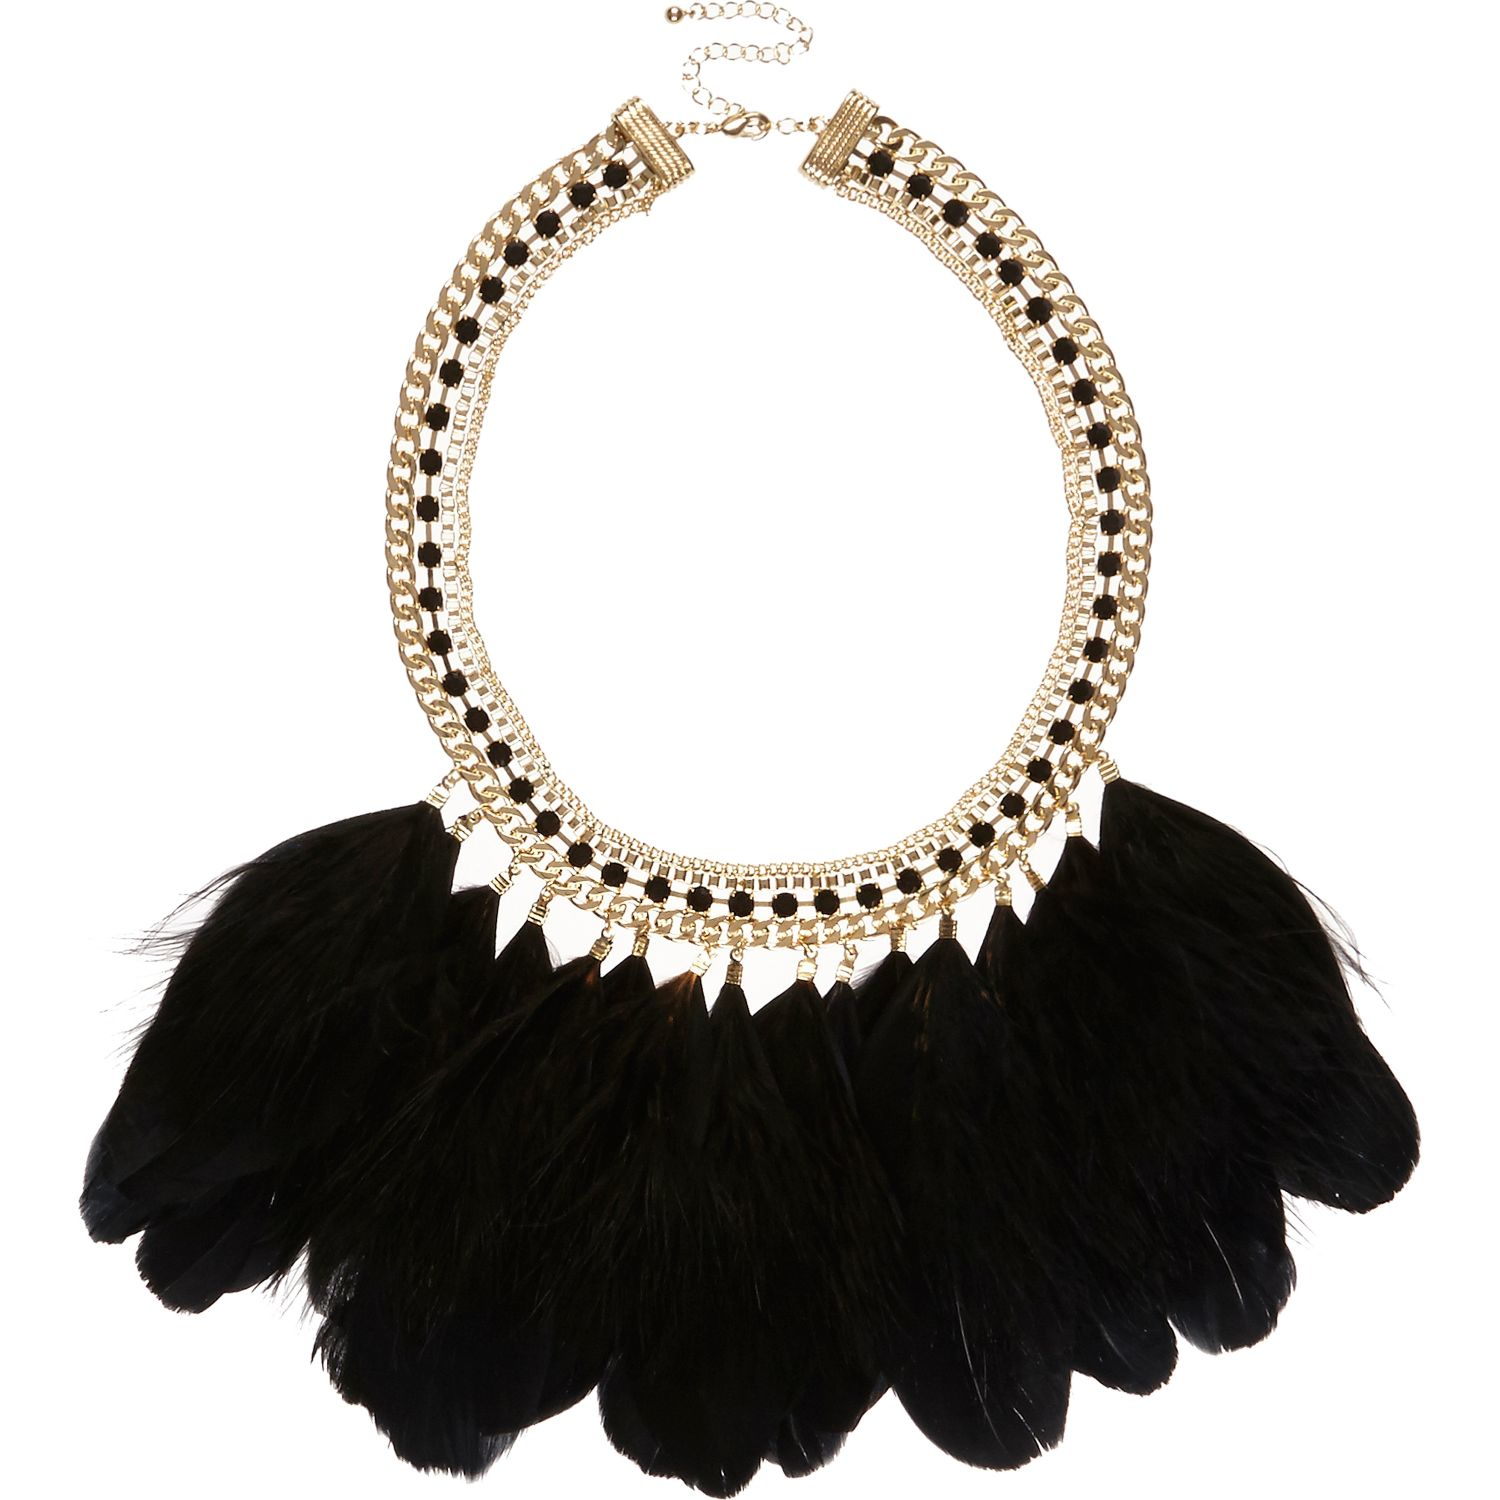 River Island Black Feather Statement Necklace - Lyst